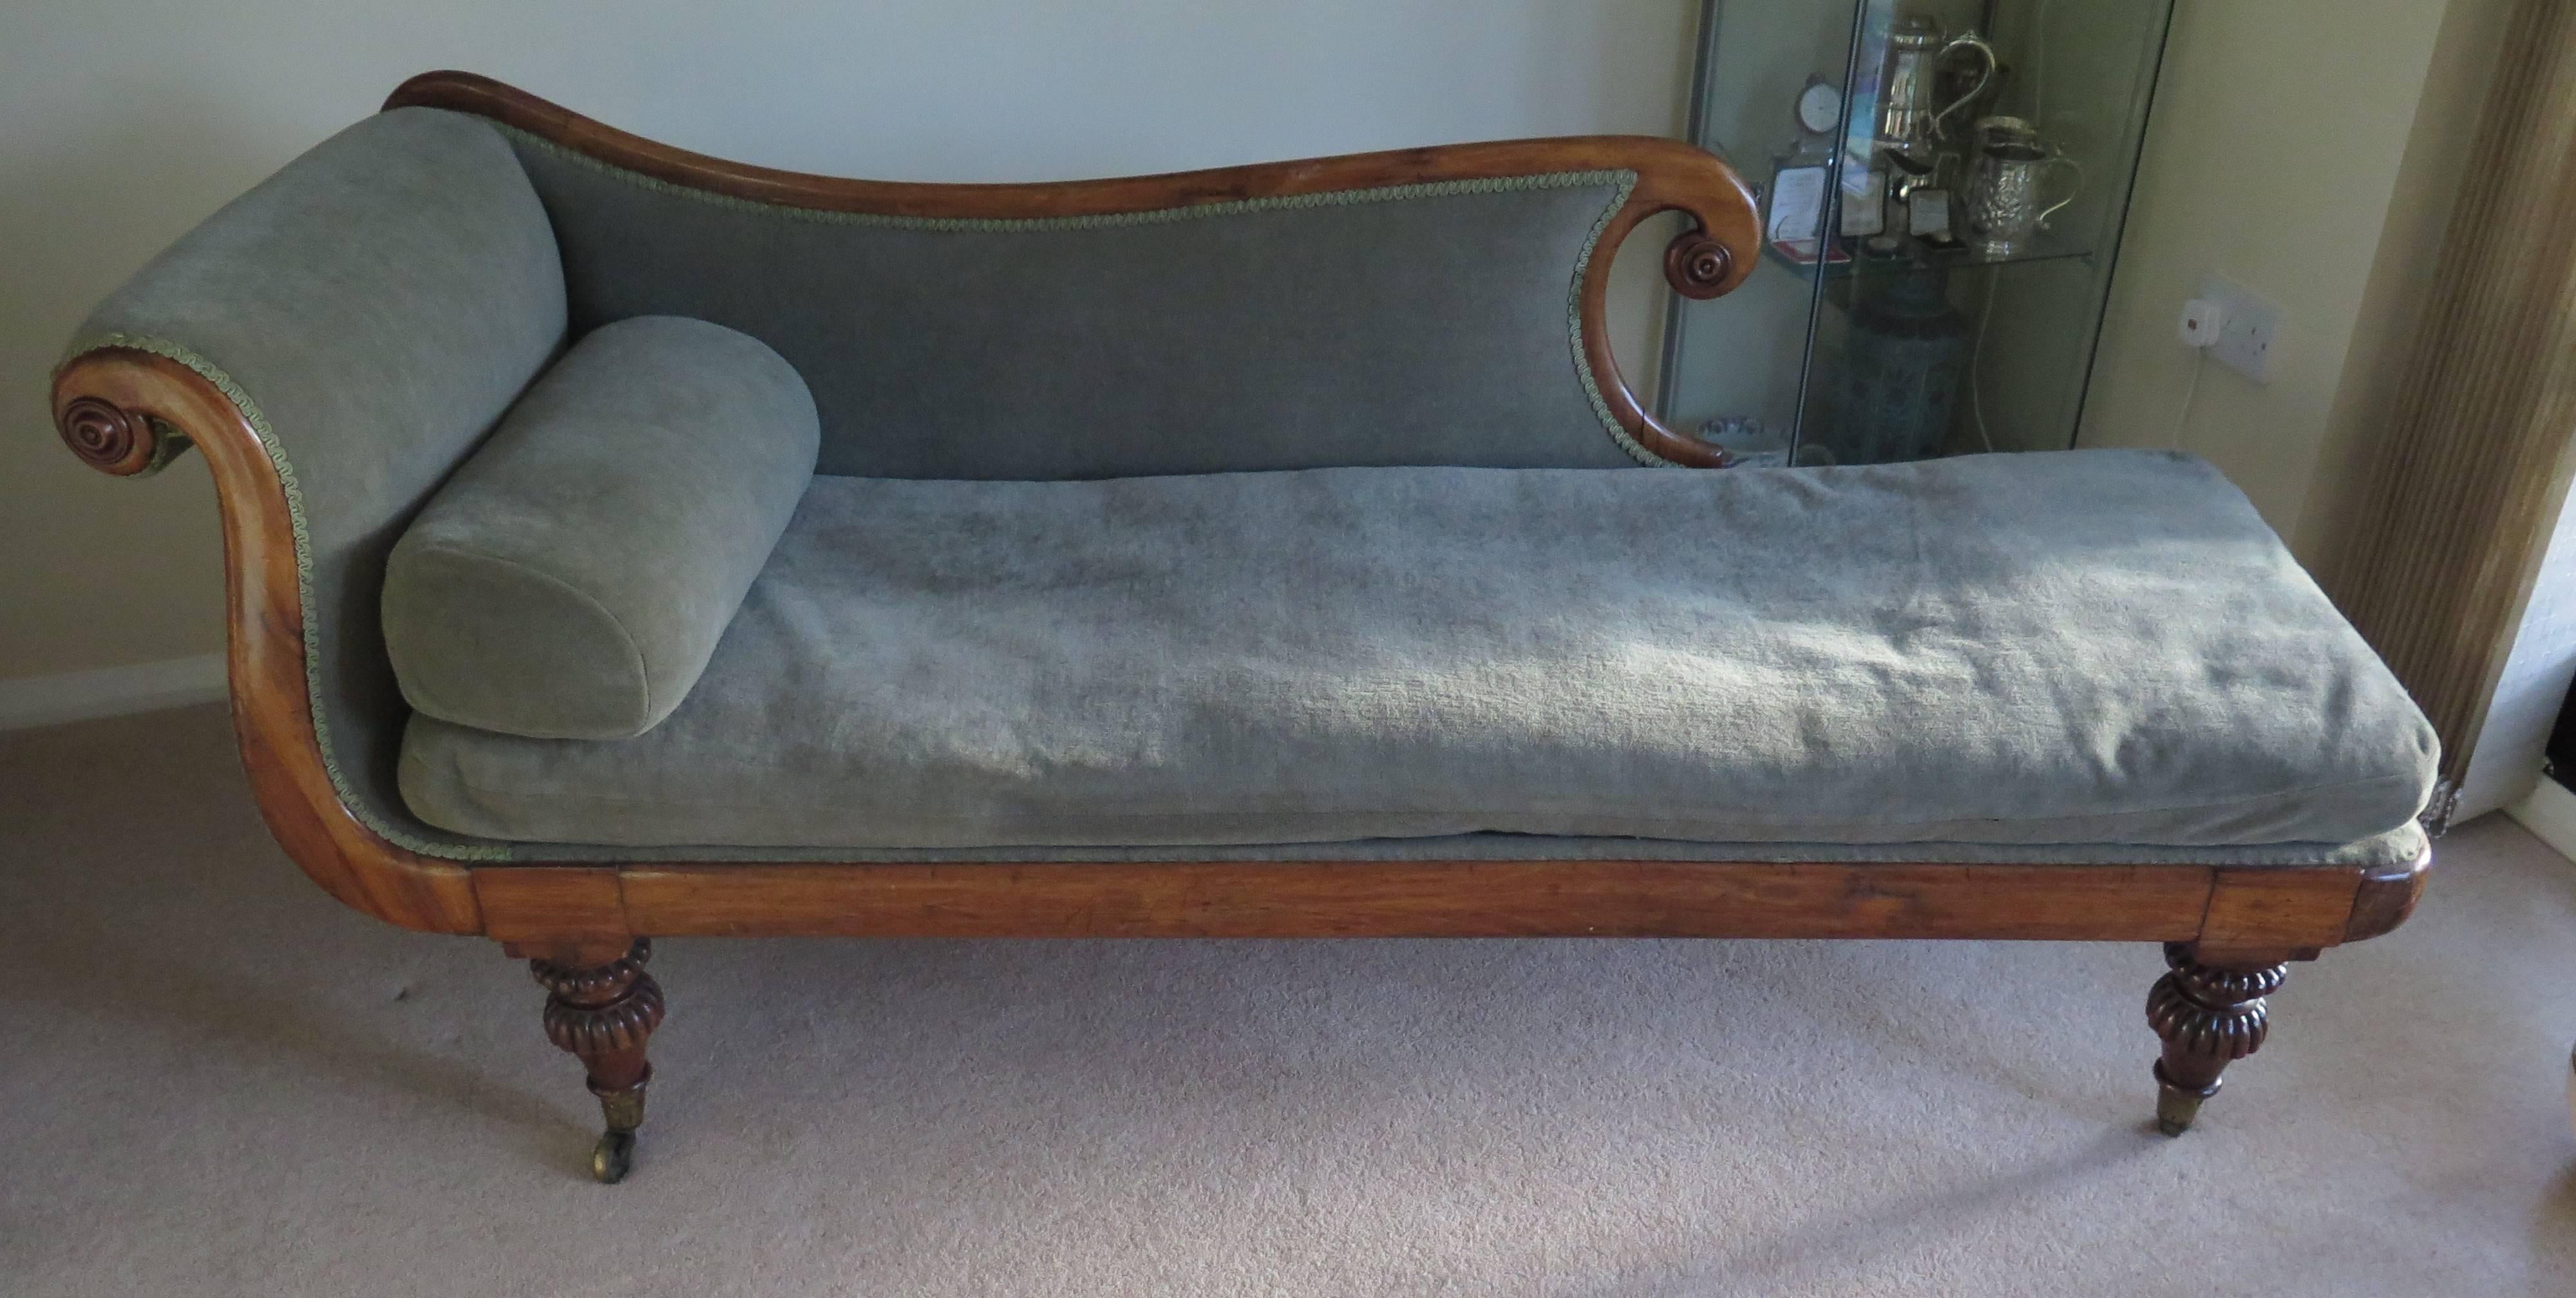 This is a very elegant Chaise Longue or Day Bed.

It is English and from the late Regency Period with a Mahogany frame.

It has a single scroll end with a low sweeping back terminating in a carved scroll, both scrolls having carved roundels. The